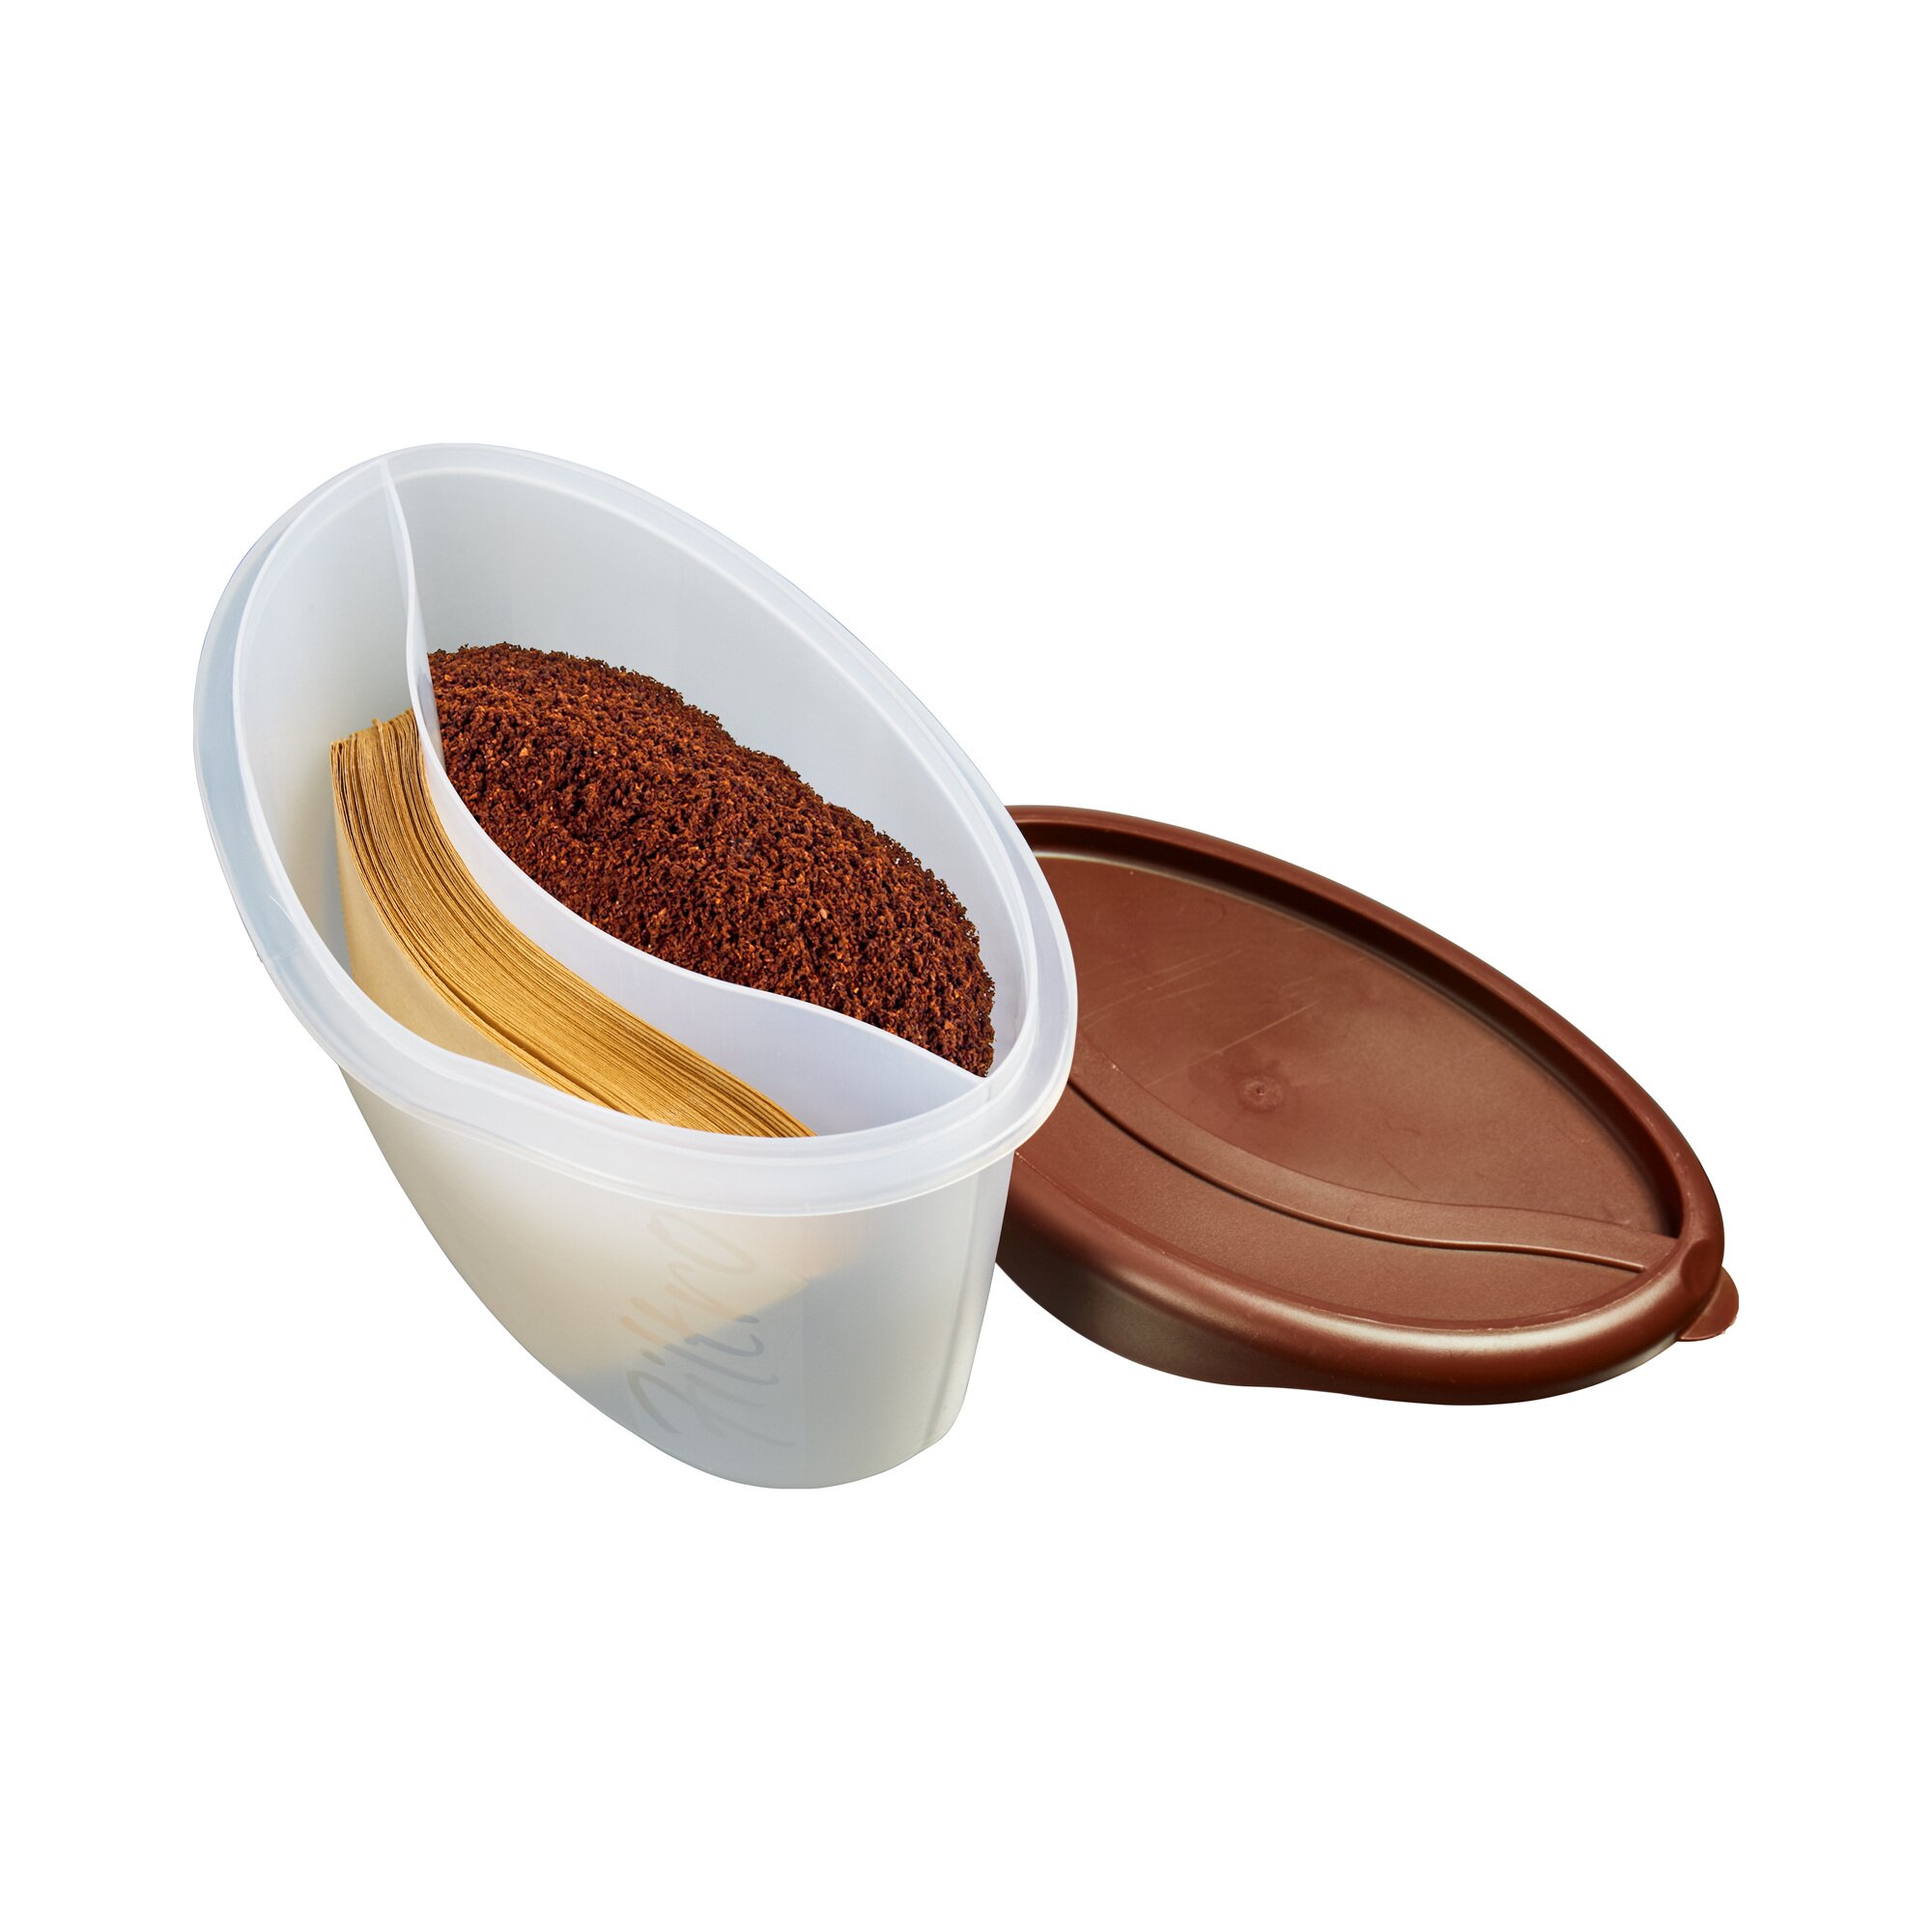 Image of Kaffeedose "2 in 1"